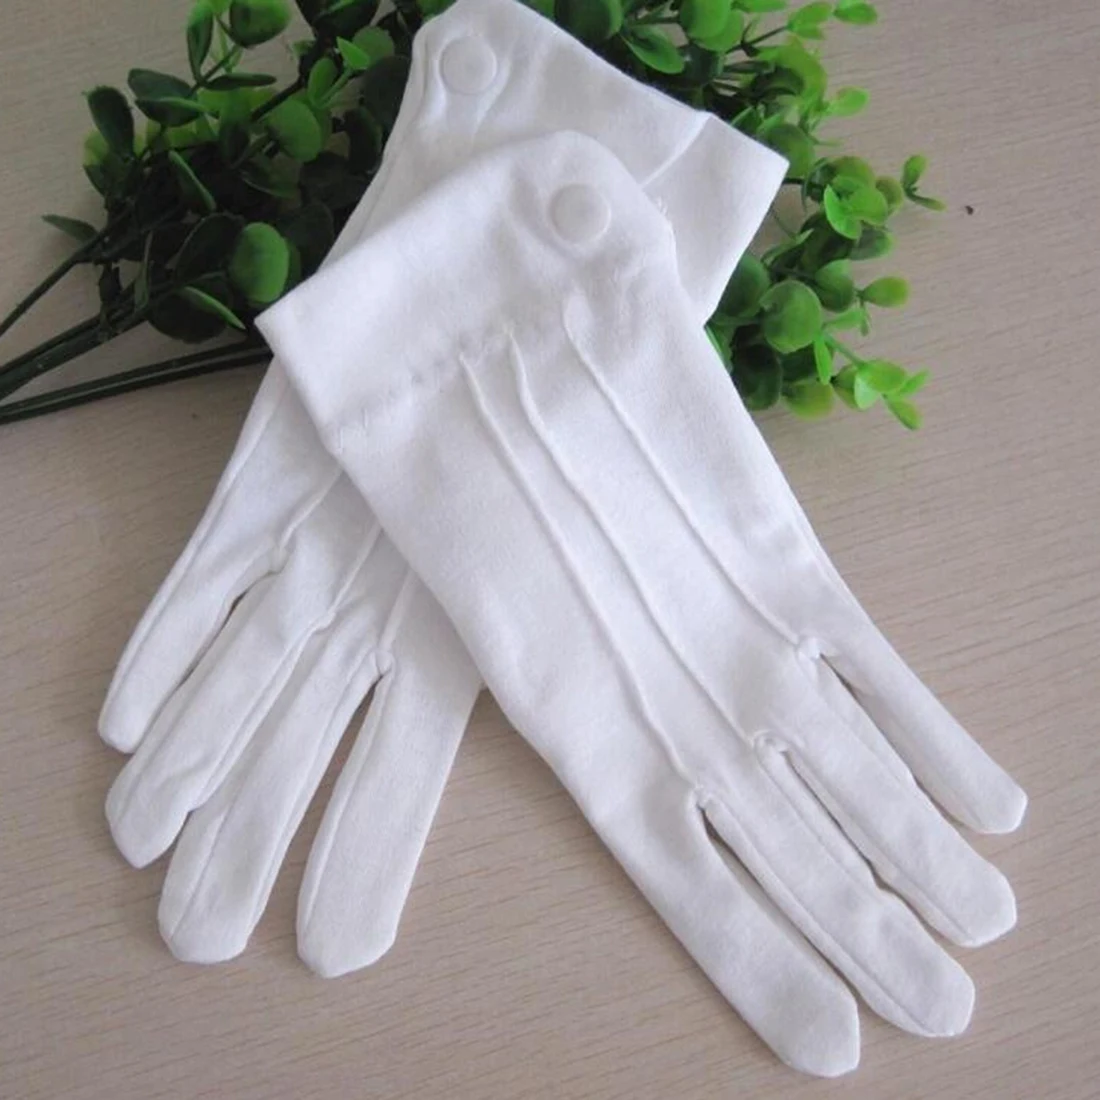 Image 2016 Spring And Autumn Men And Women s Cotton White Gloves Elastic Etiquette Gloves